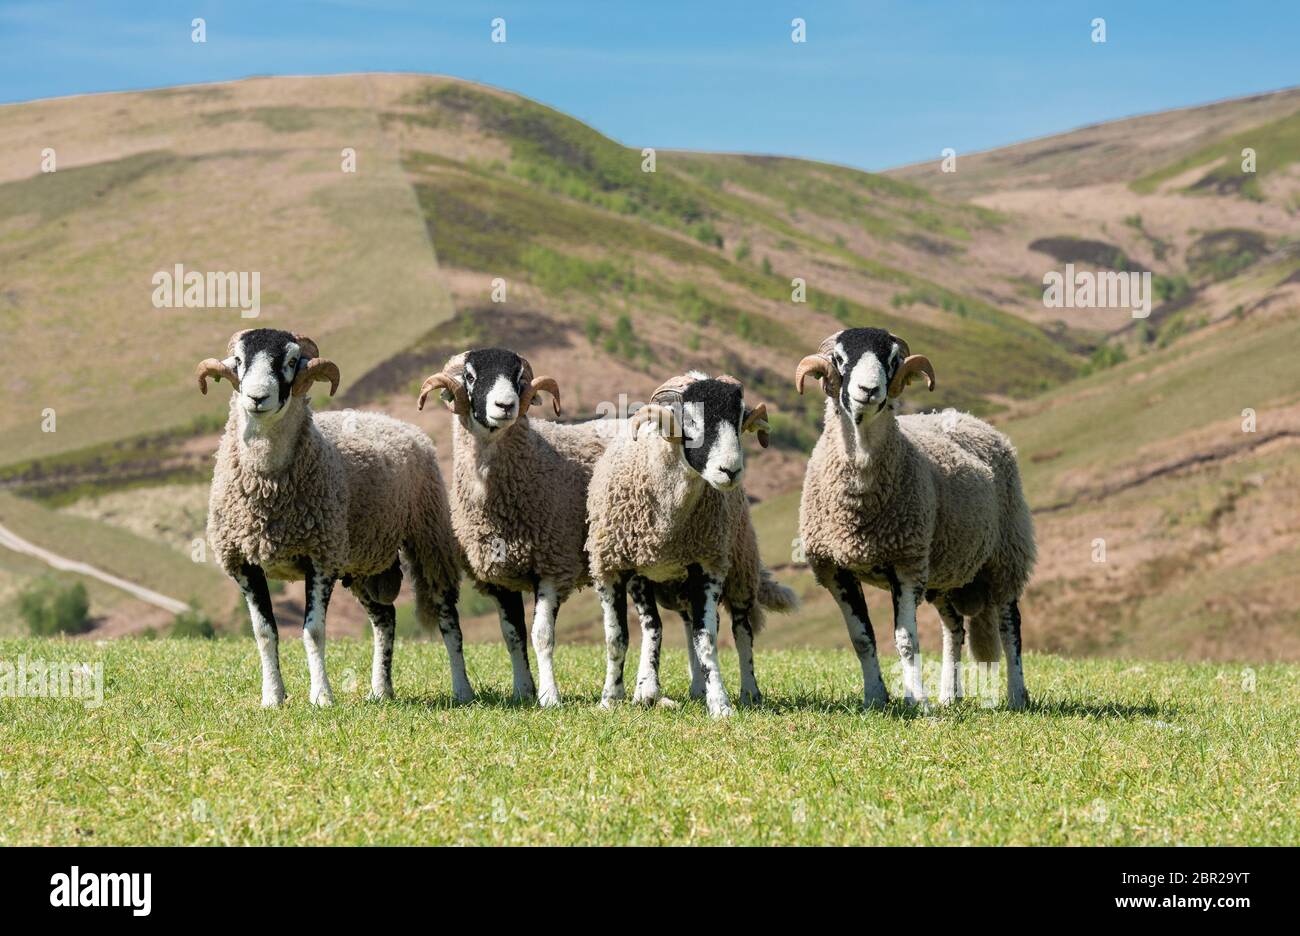 Dunsop Bridge, Lancashire. 20th May 2020. Swaledale yearling rams ready for a photograph at Geoff WalkerÕs Brennand Farm, Dunsop Bridge, Clitheroe, Lancashire. The photograph will be used as an entry to a competition replacing the Tan Hill Show cancelled because of Coronavirus. Credit: John Eveson/Alamy Live News Stock Photo